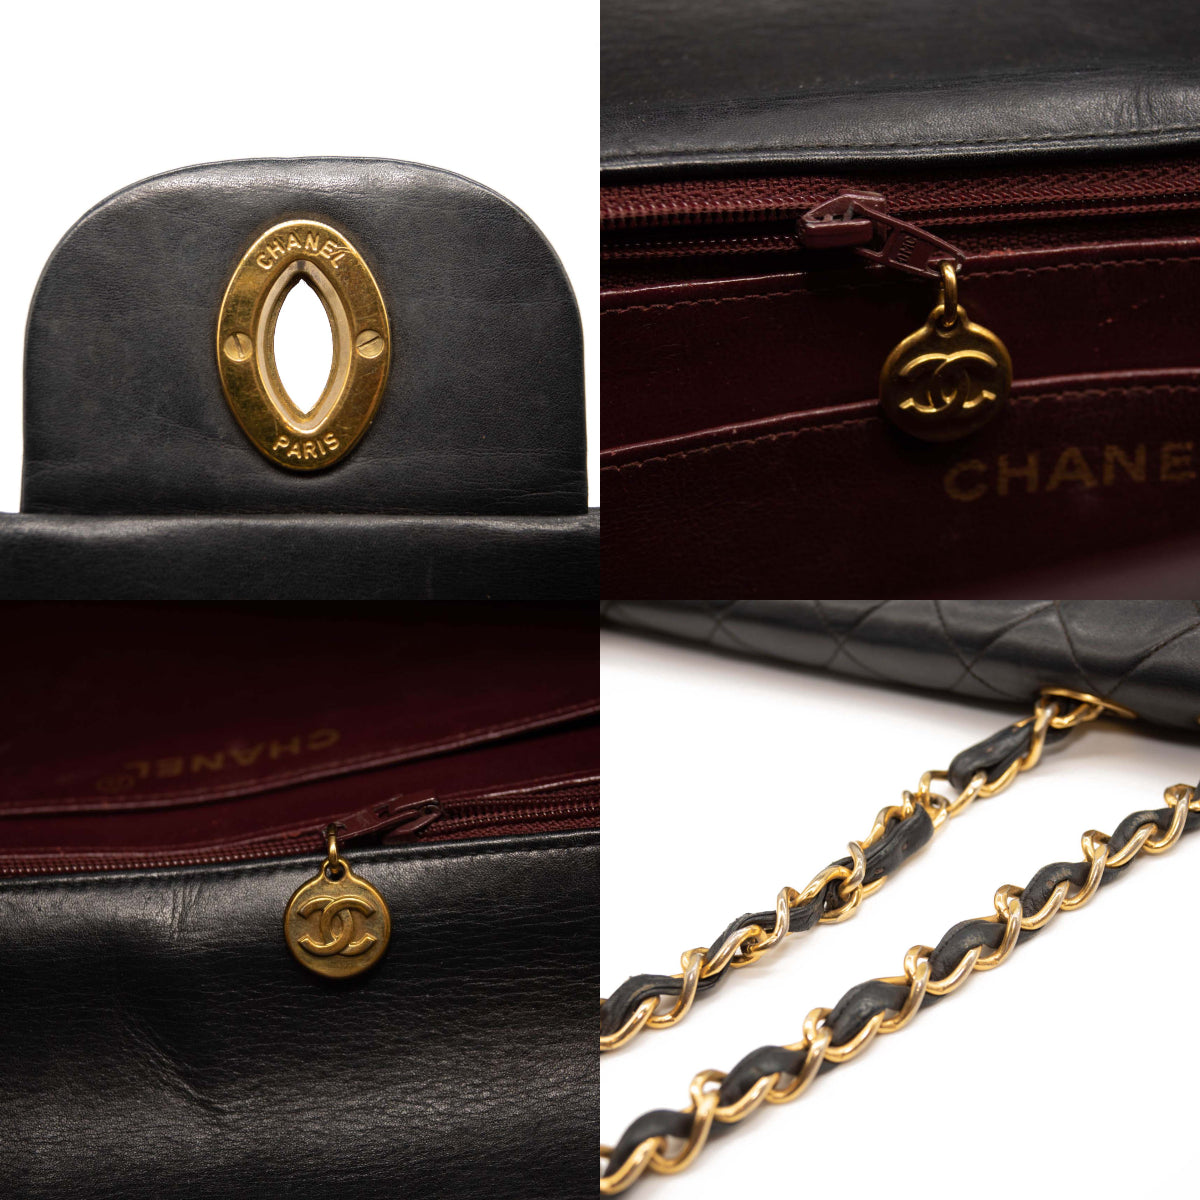 CHANEL Black Lambskin Leather Quilted O-Coin Purse Case Bag Gold